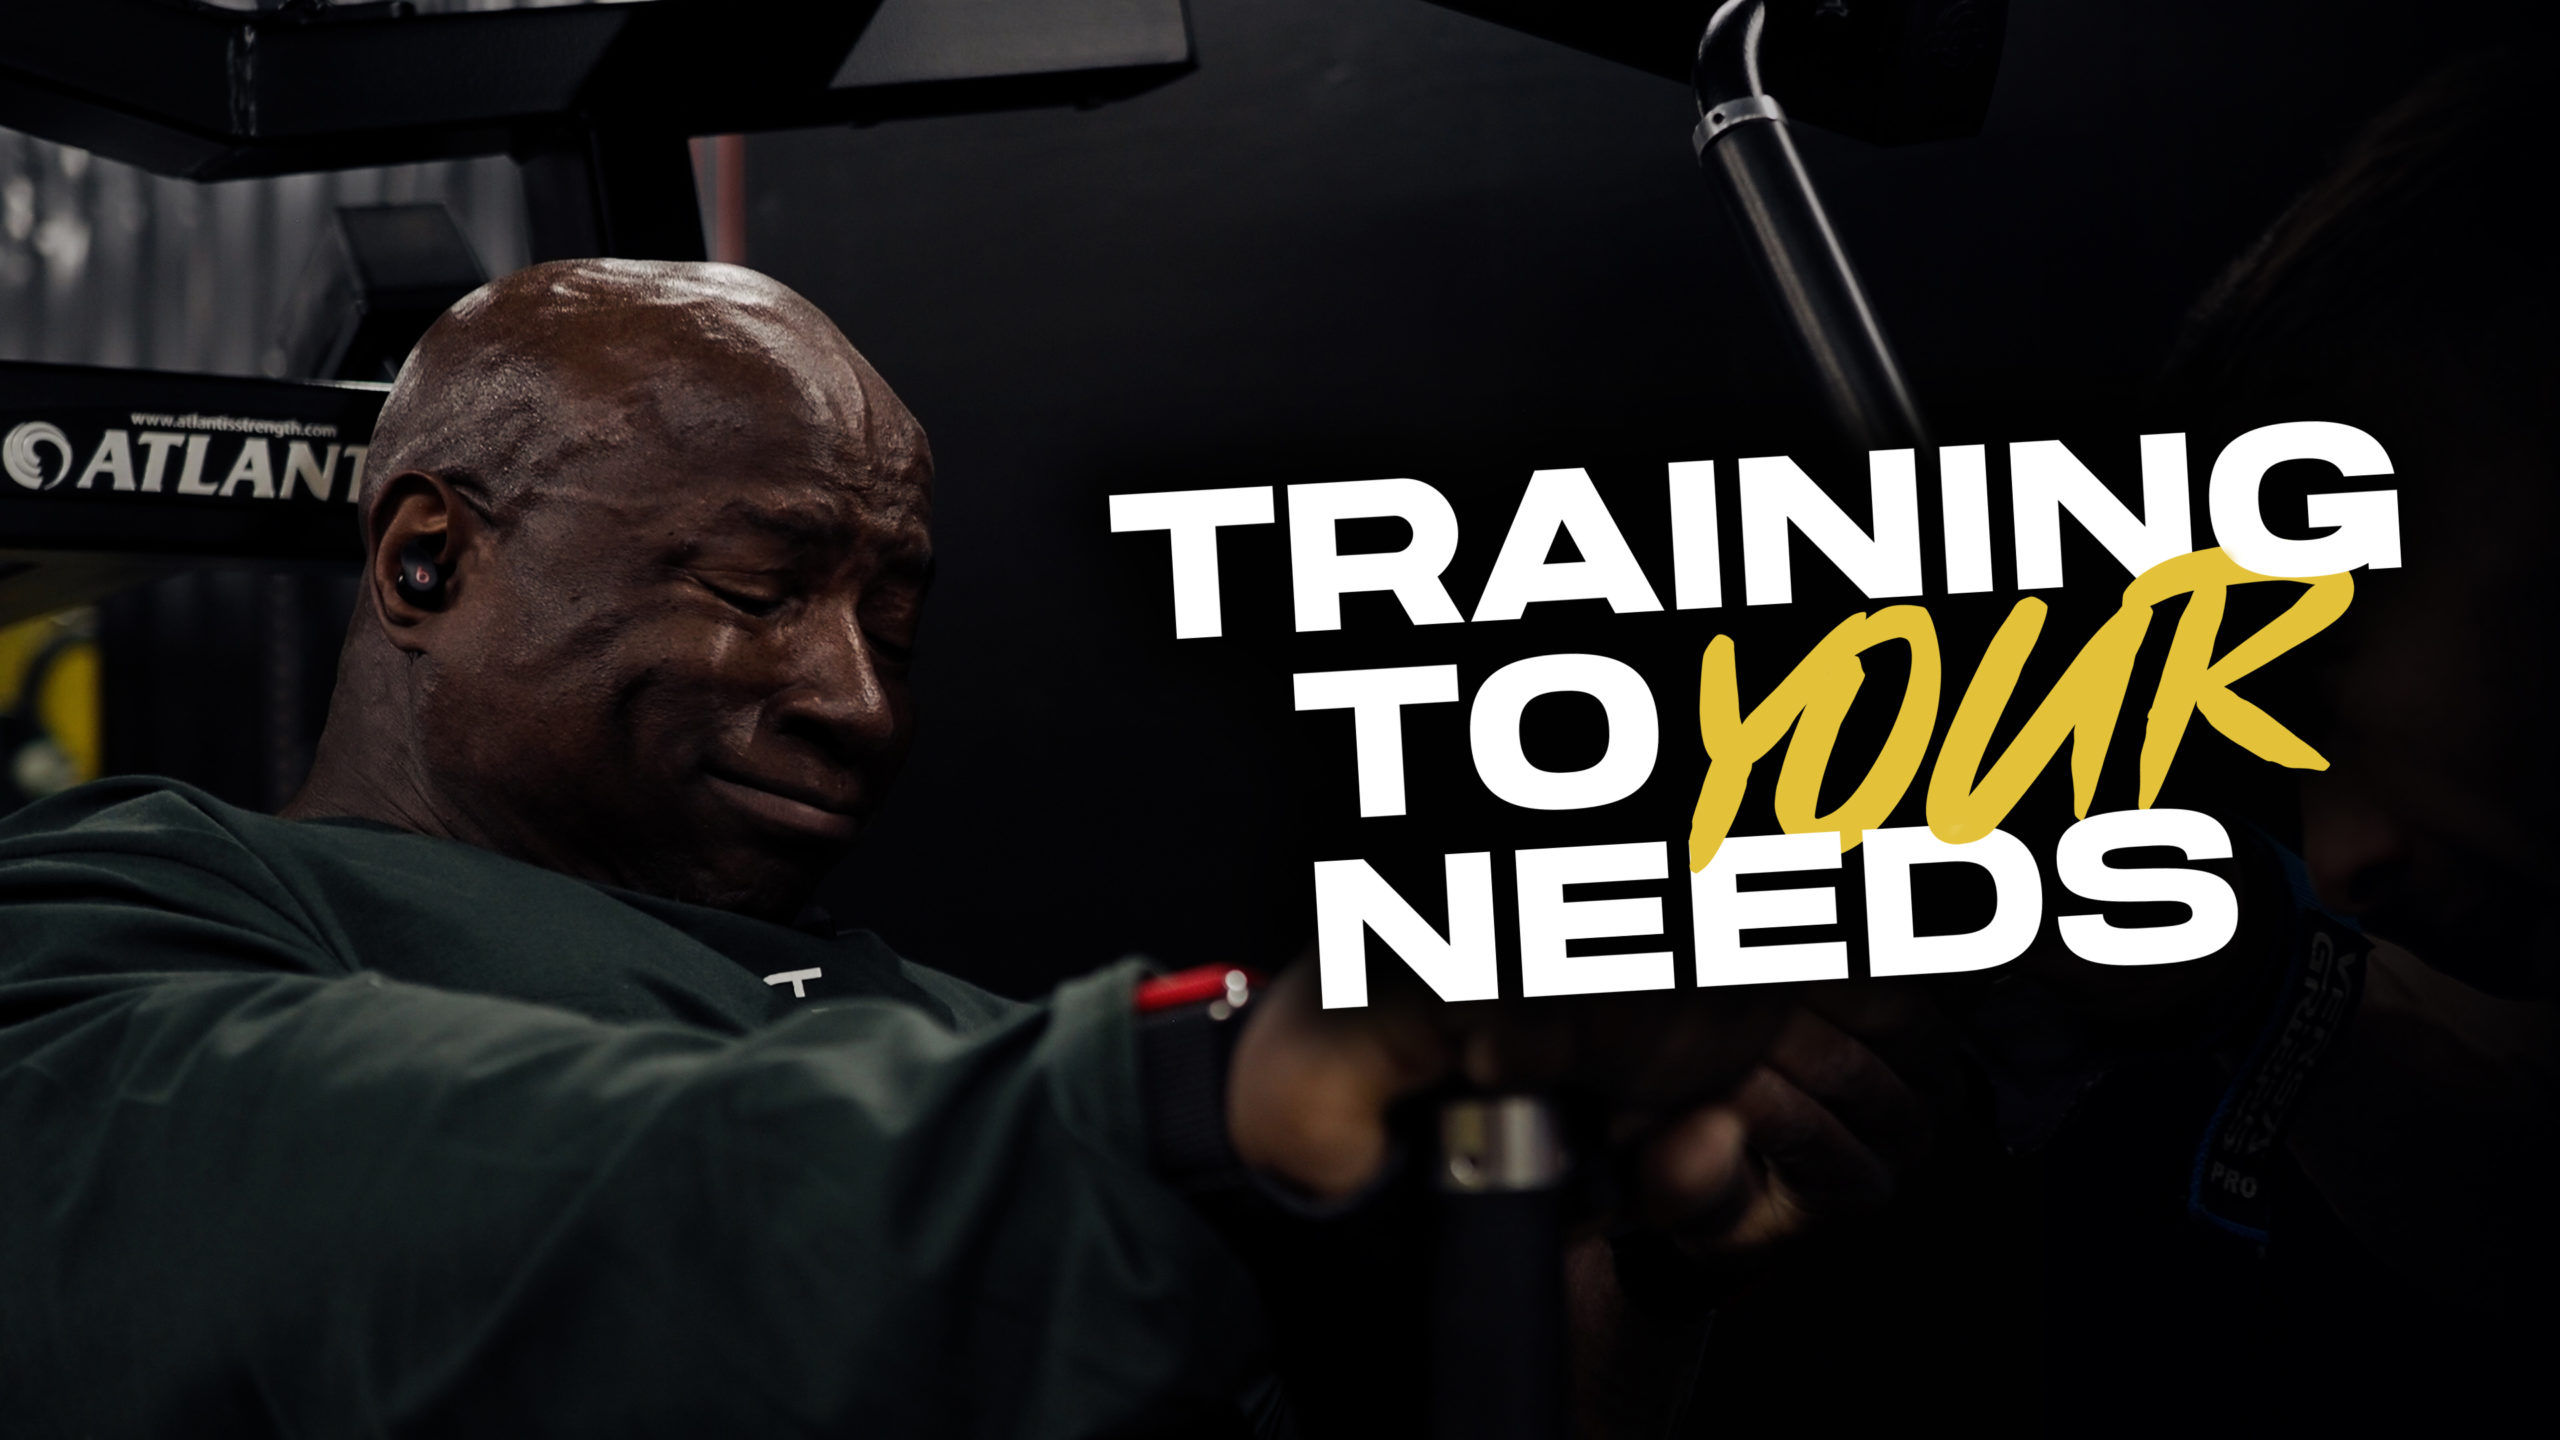 TRAINING TO YOUR NEEDS